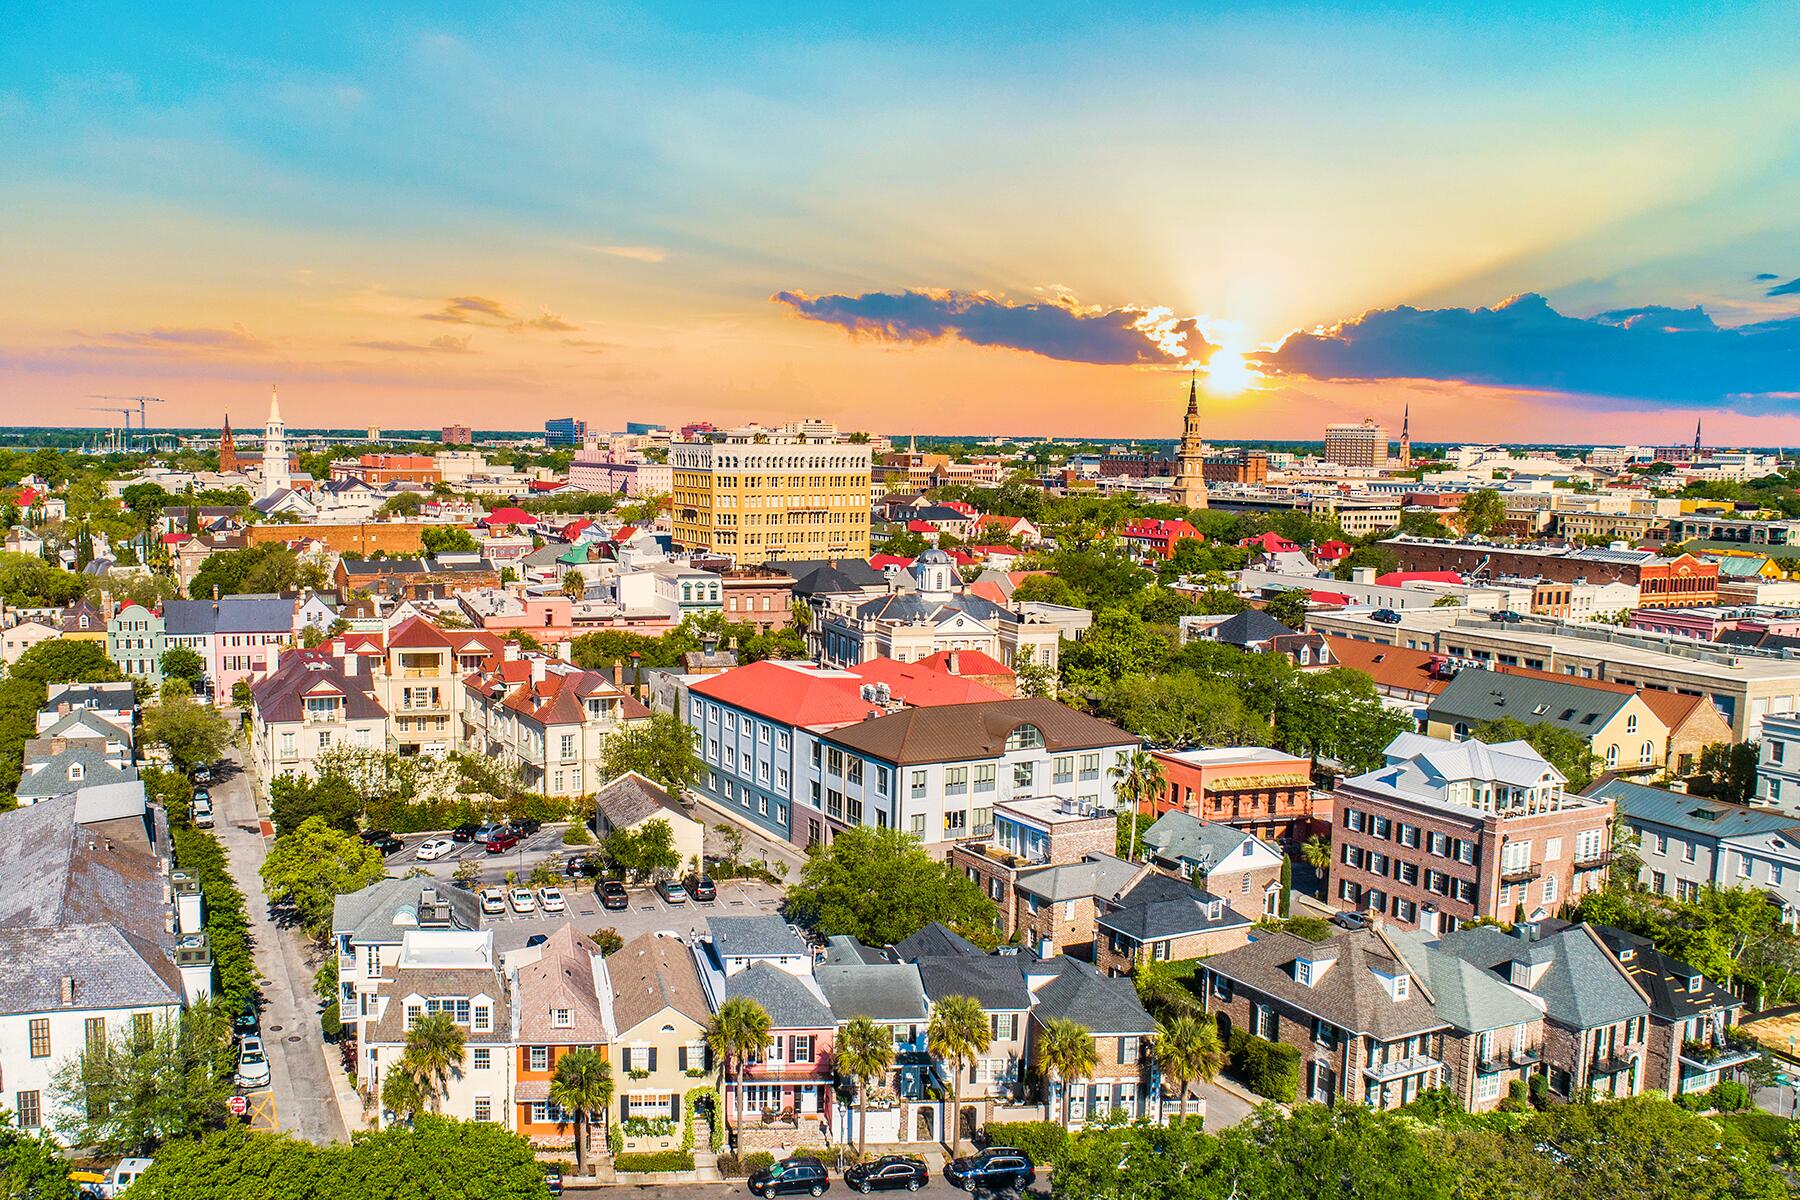 <a href='https://www.fodors.com/world/north-america/usa/south-carolina/charleston/experiences/news/photos/25-ultimate-things-to-do-in-charleston#'>From &quot;30 Ultimate Things to Do in Charleston, South Carolina&quot;</a>